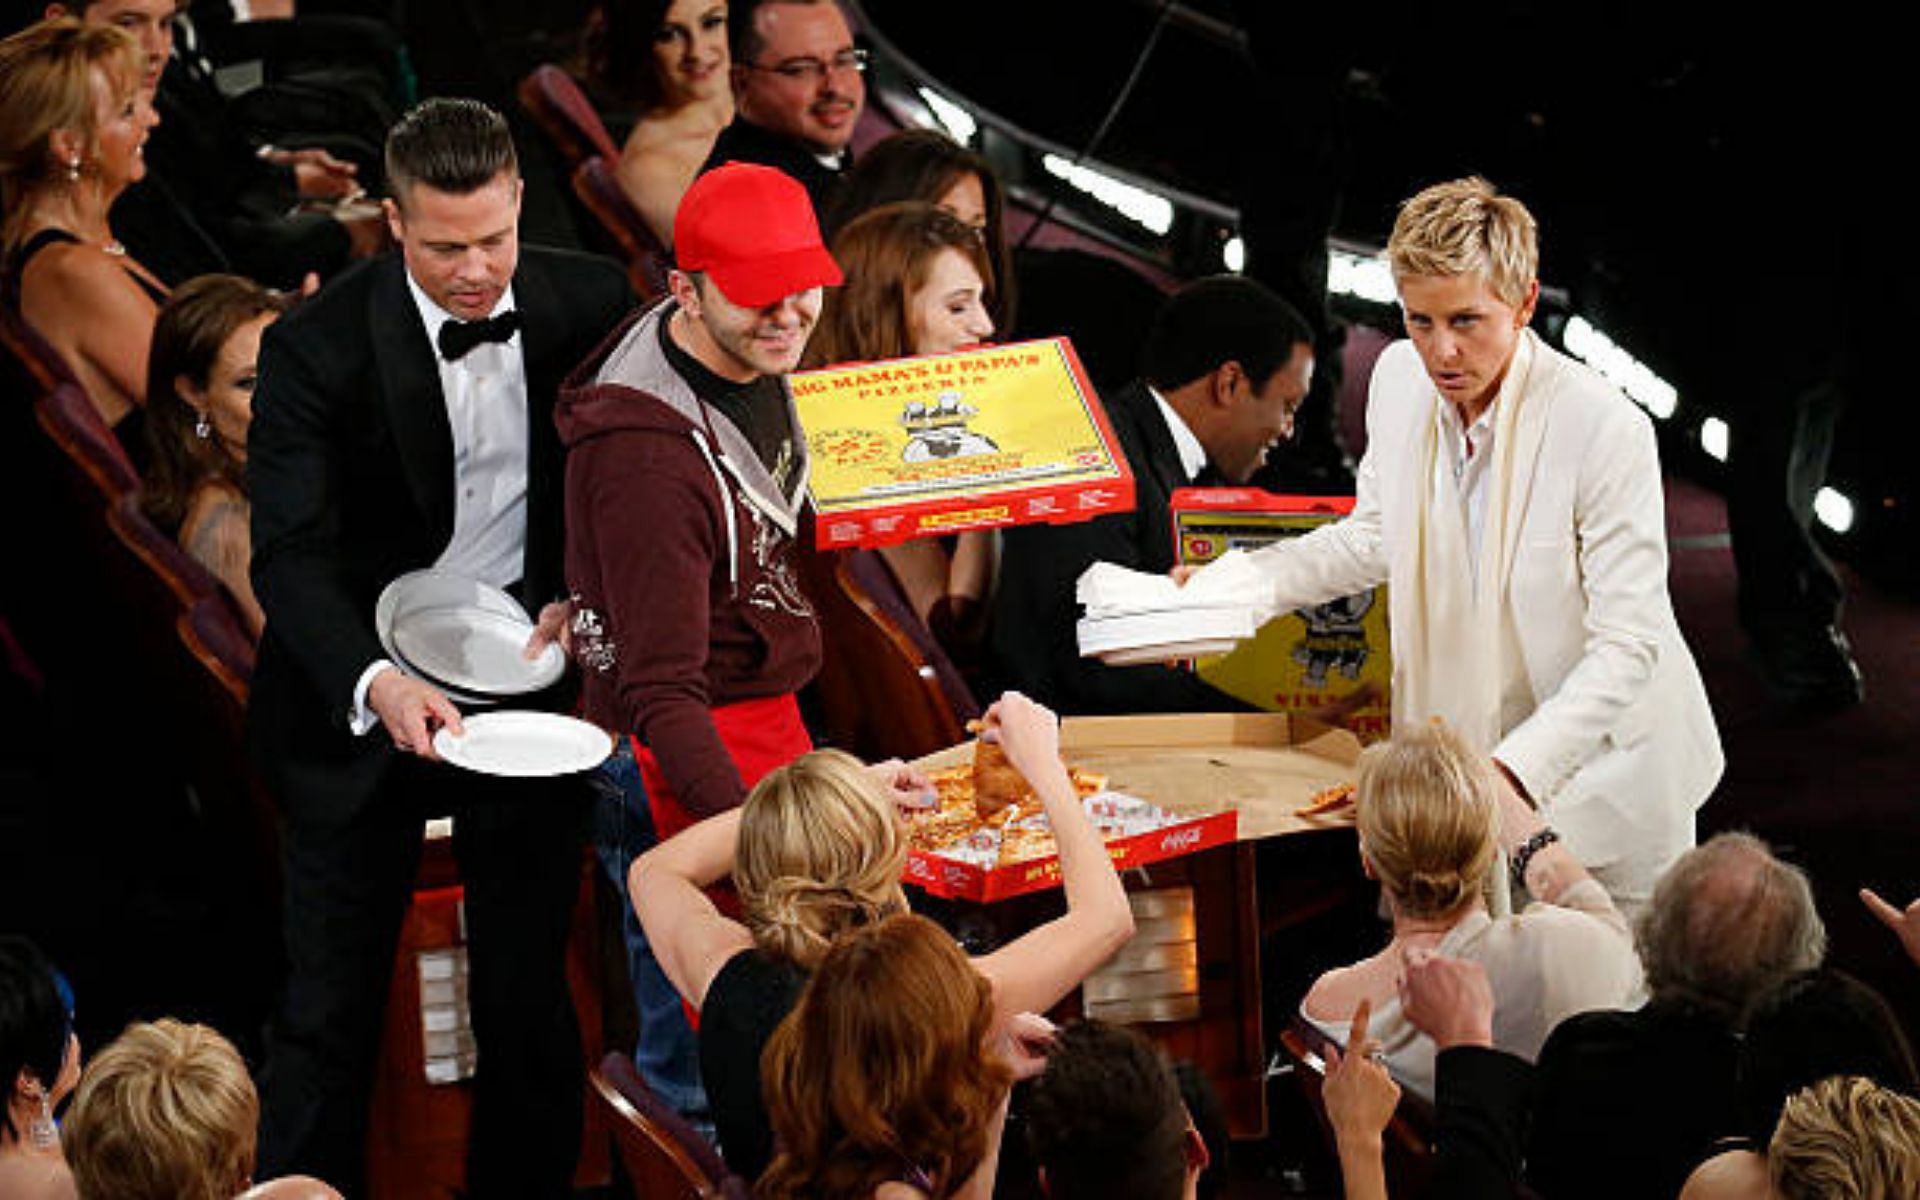 Ellen DeGeneres shares pizza at the 86th Academy Awards (Image via Getty Images)